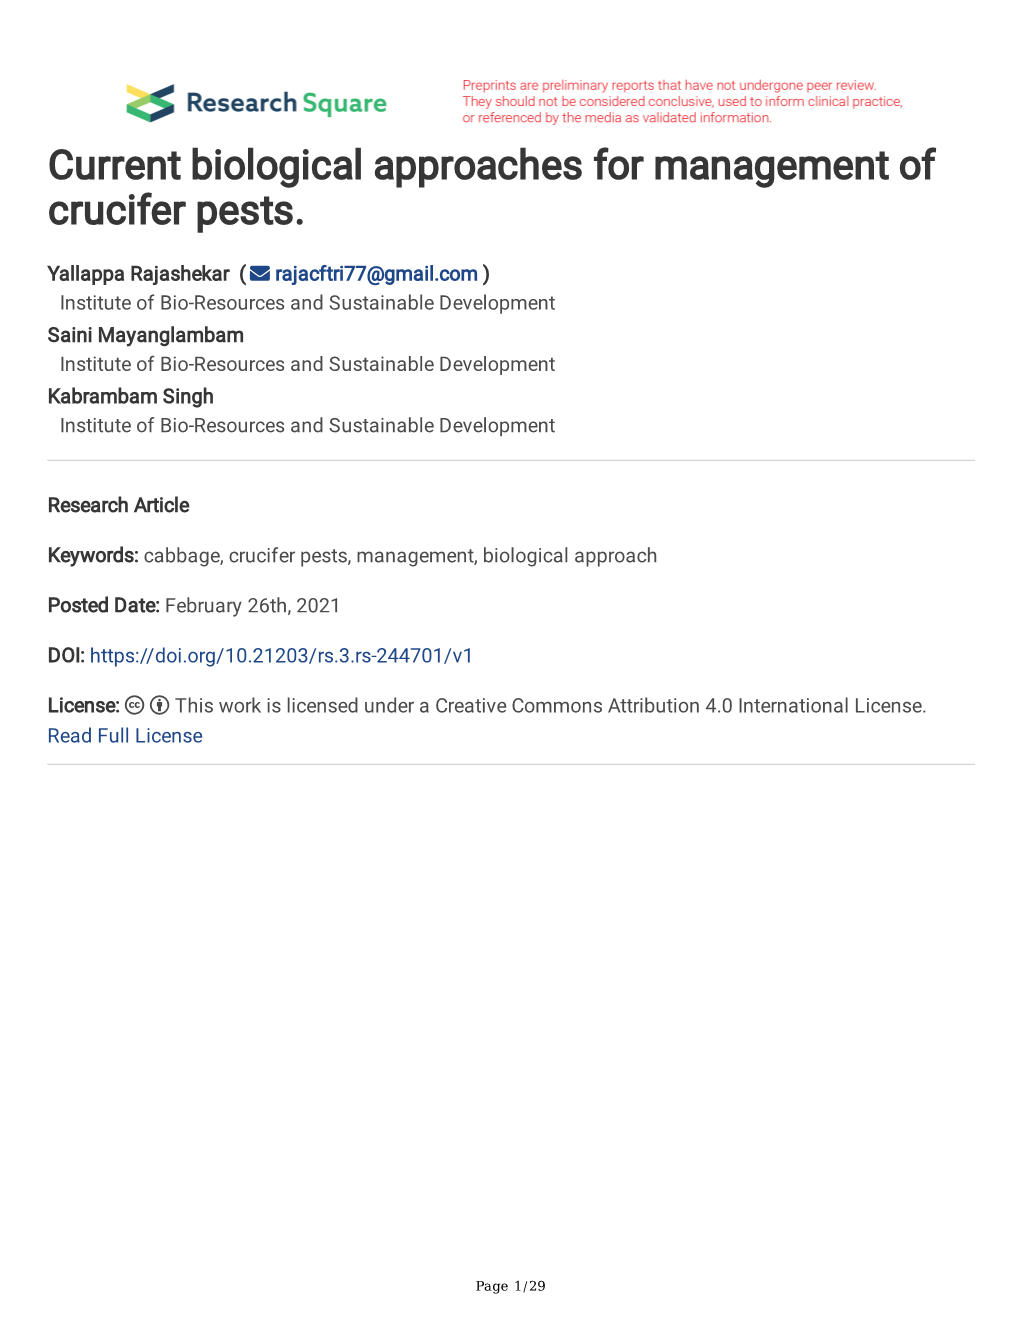 Current Biological Approaches for Management of Crucifer Pests